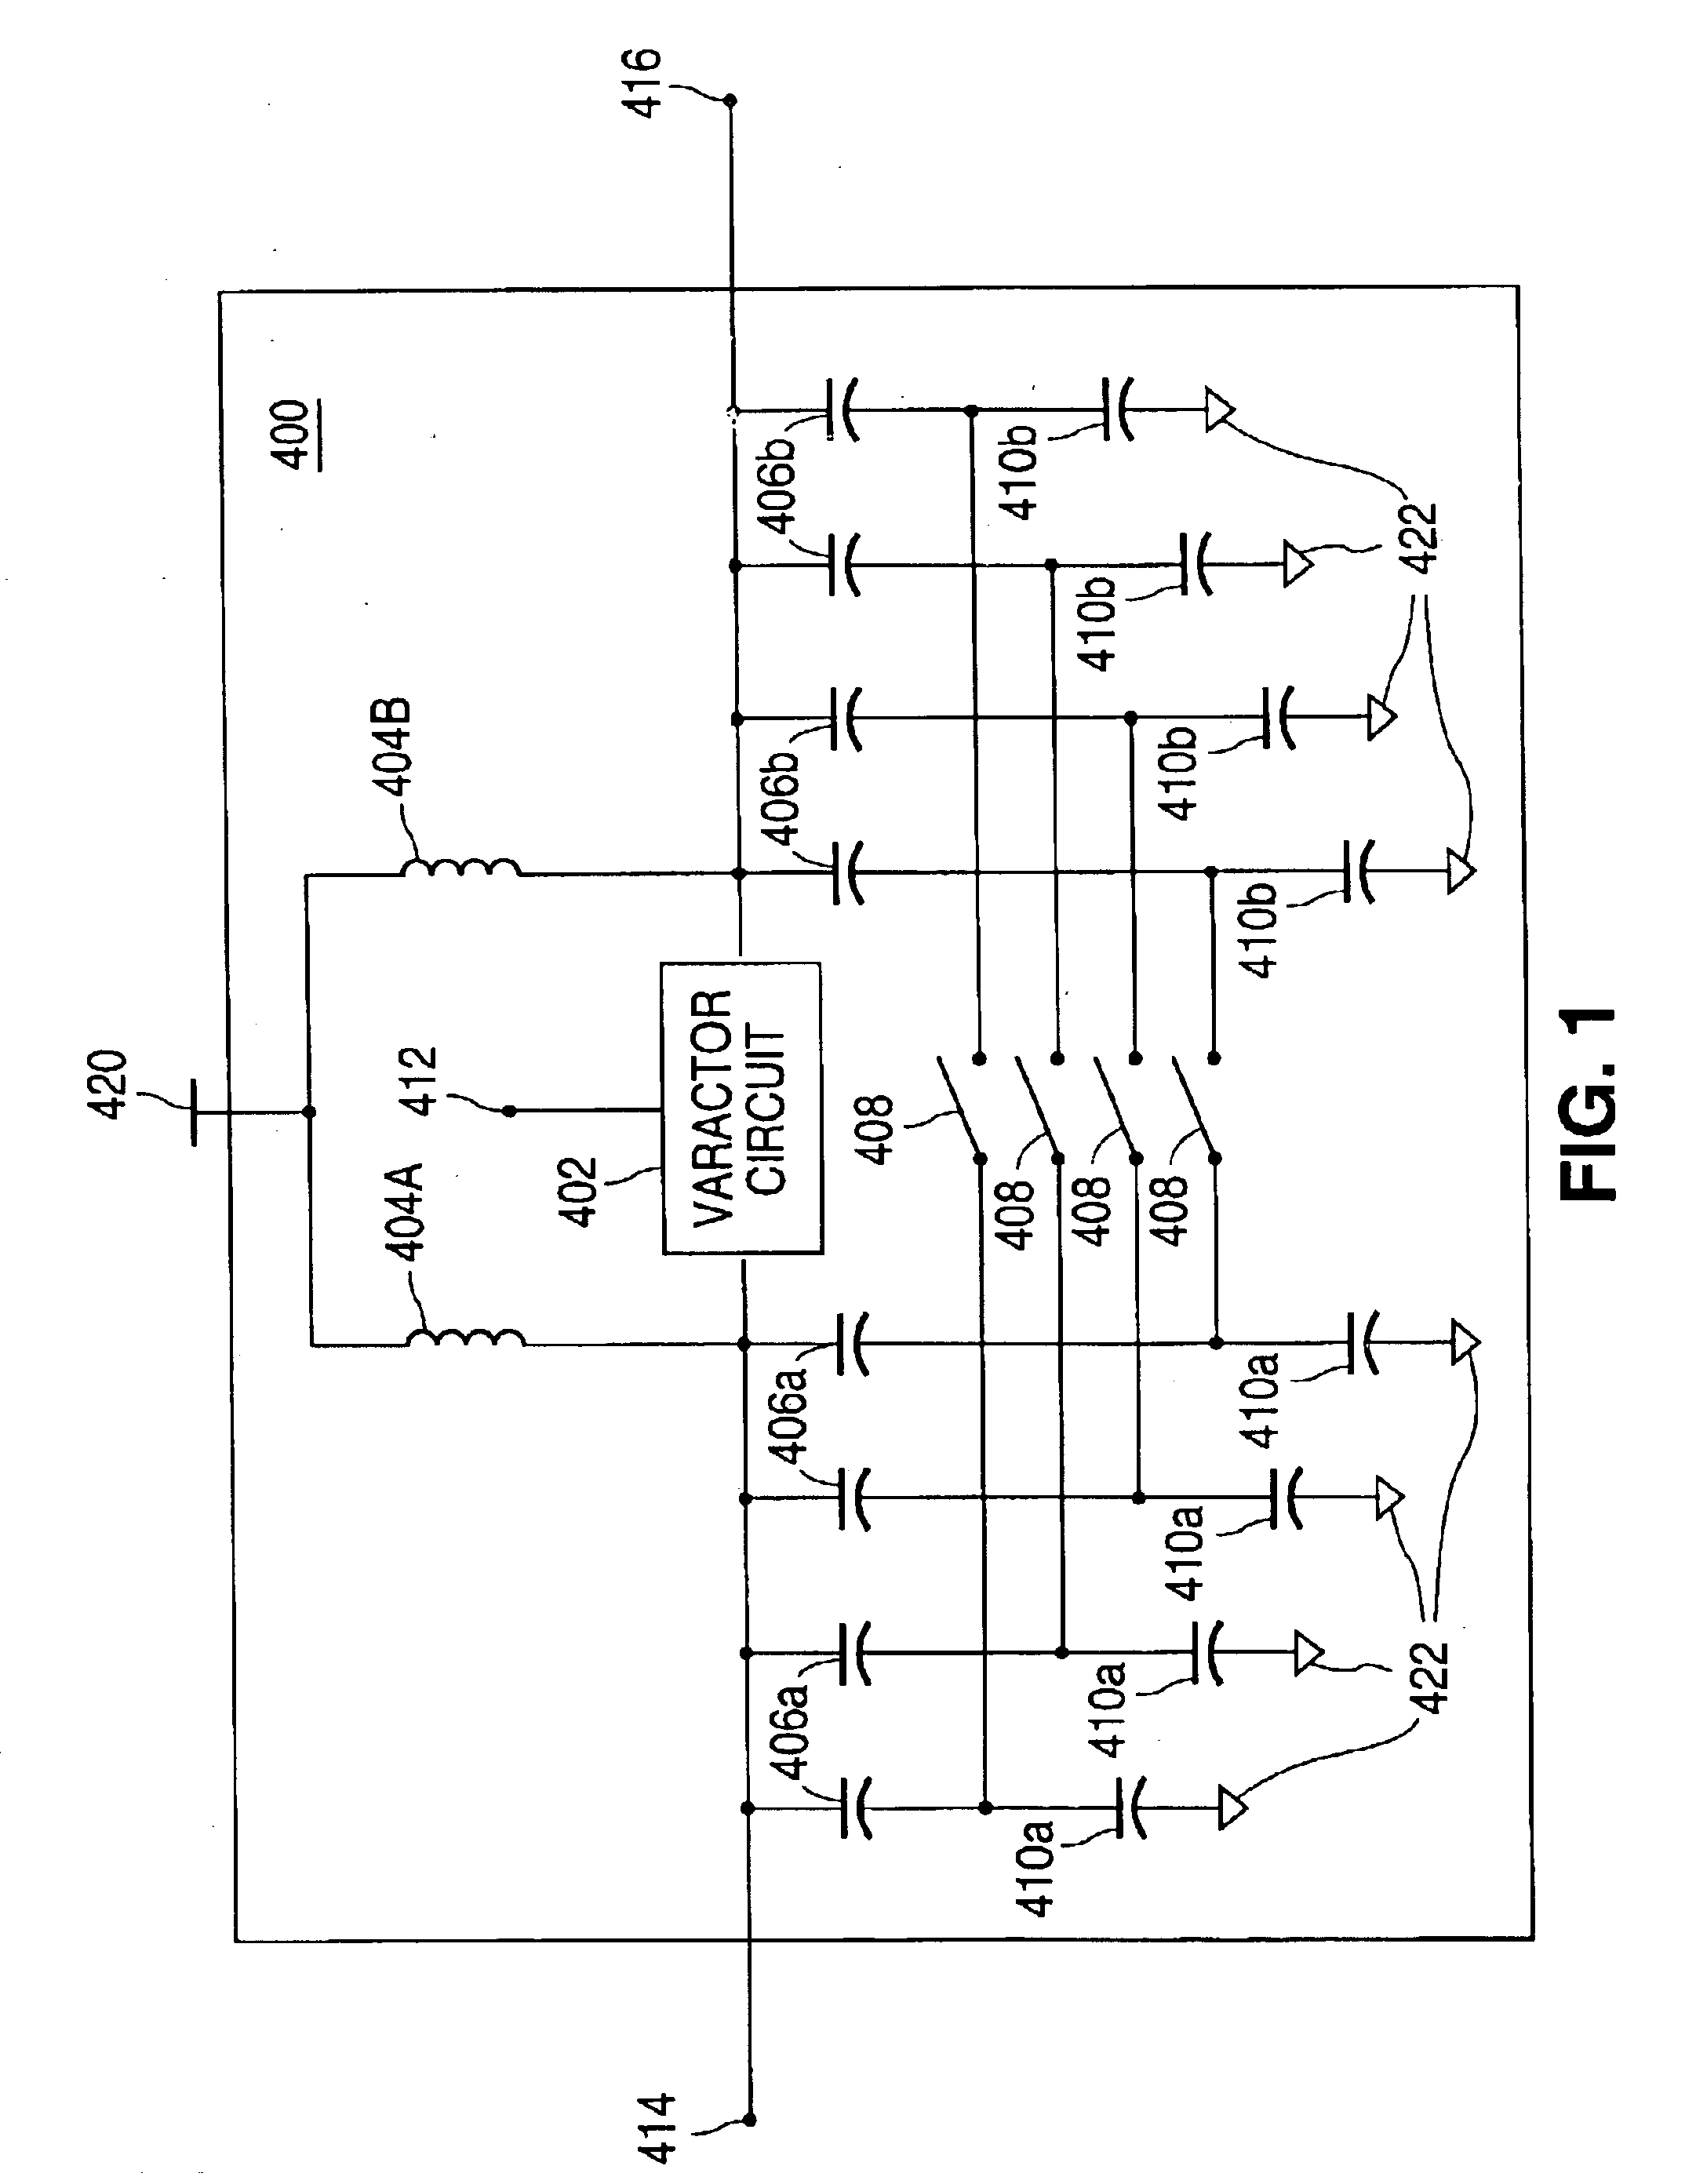 Linear voltage controlled capacitance circuit